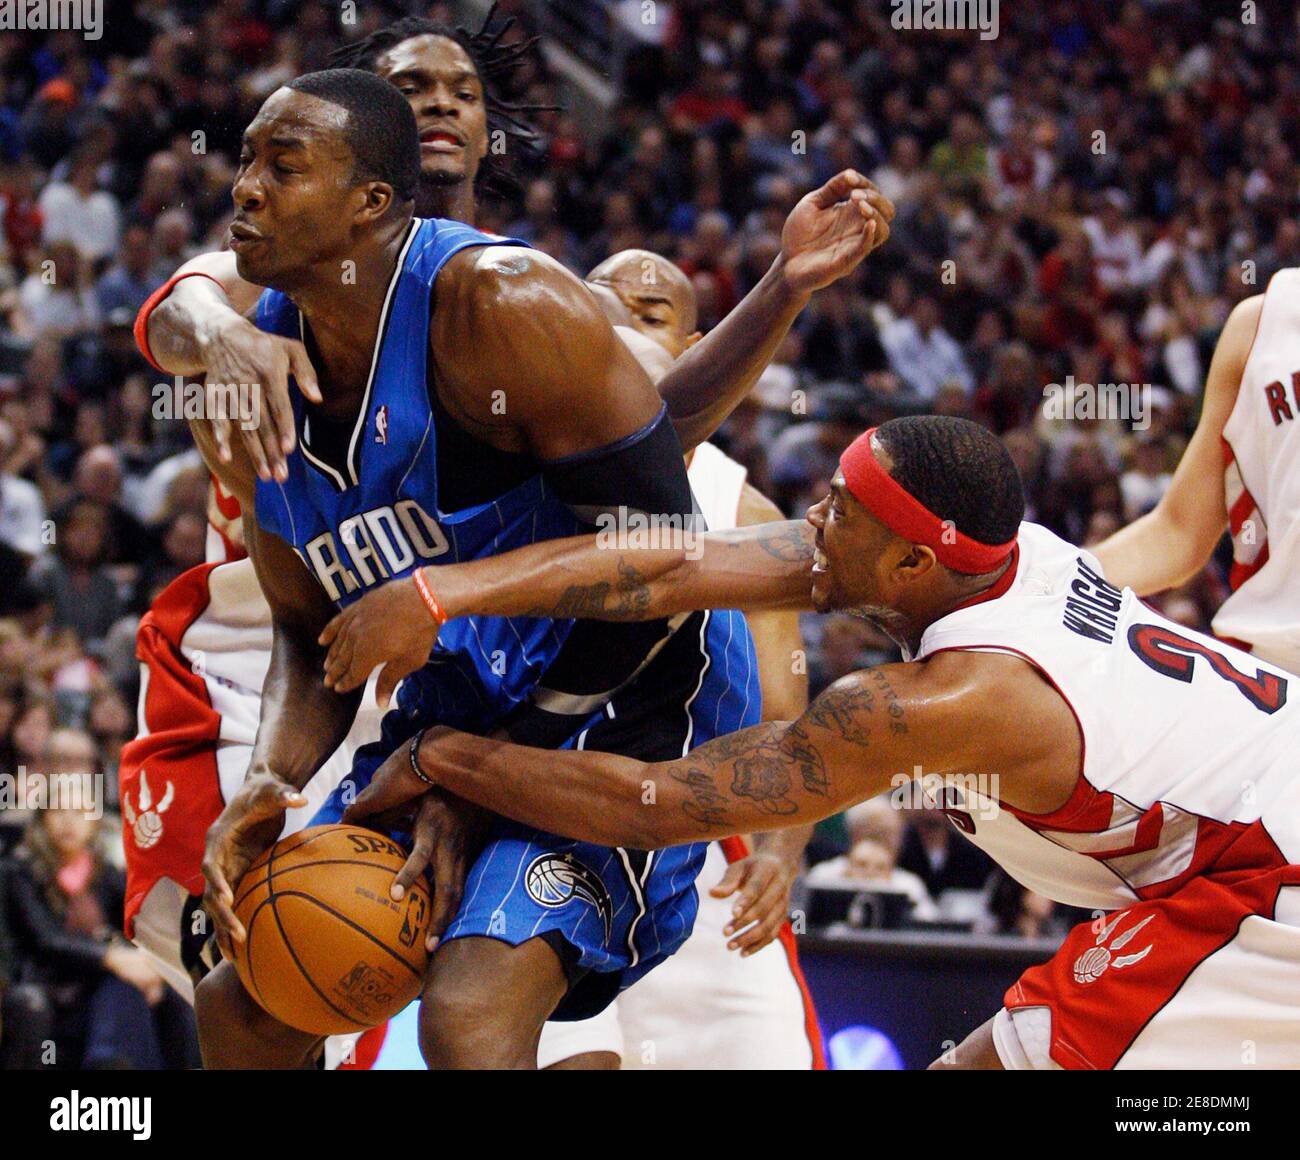 Orlando Magic center Dwight Howard (L) is double teamed by Toronto Raptors  forwards Chris Bosh and Antoine Wright (R) during the second half of their  NBA basketball game in Toronto November 1,